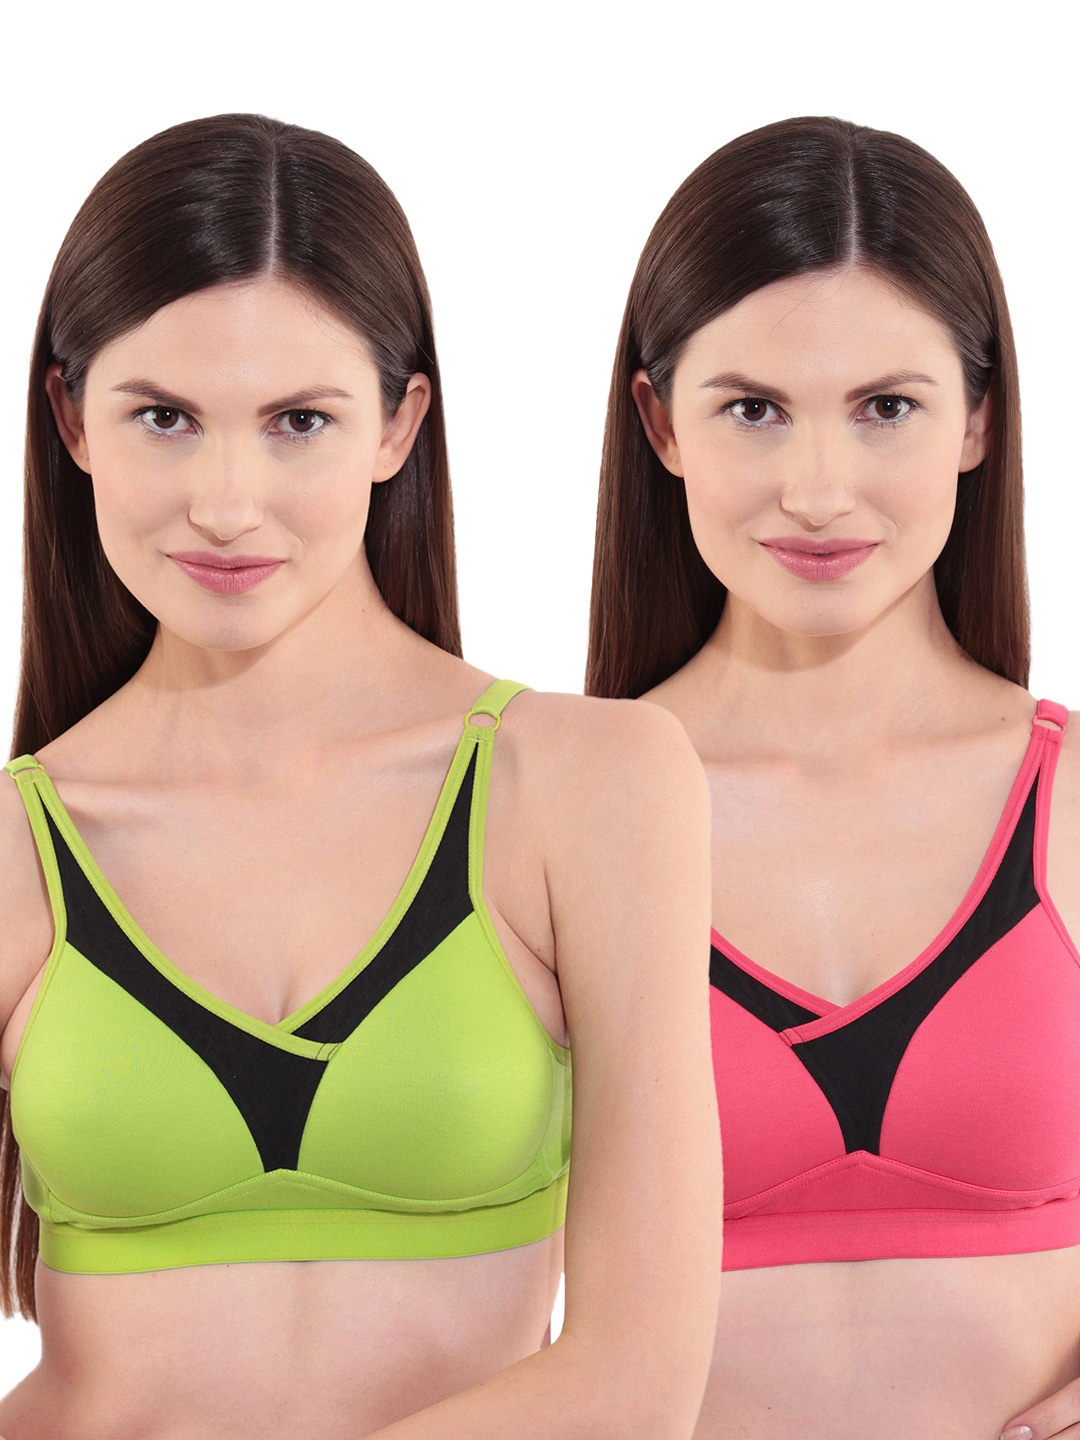 Buy Floret Pack of 2 Solid Non-Wired Heavily Padded Push-Up Bra -  Multi-Color online